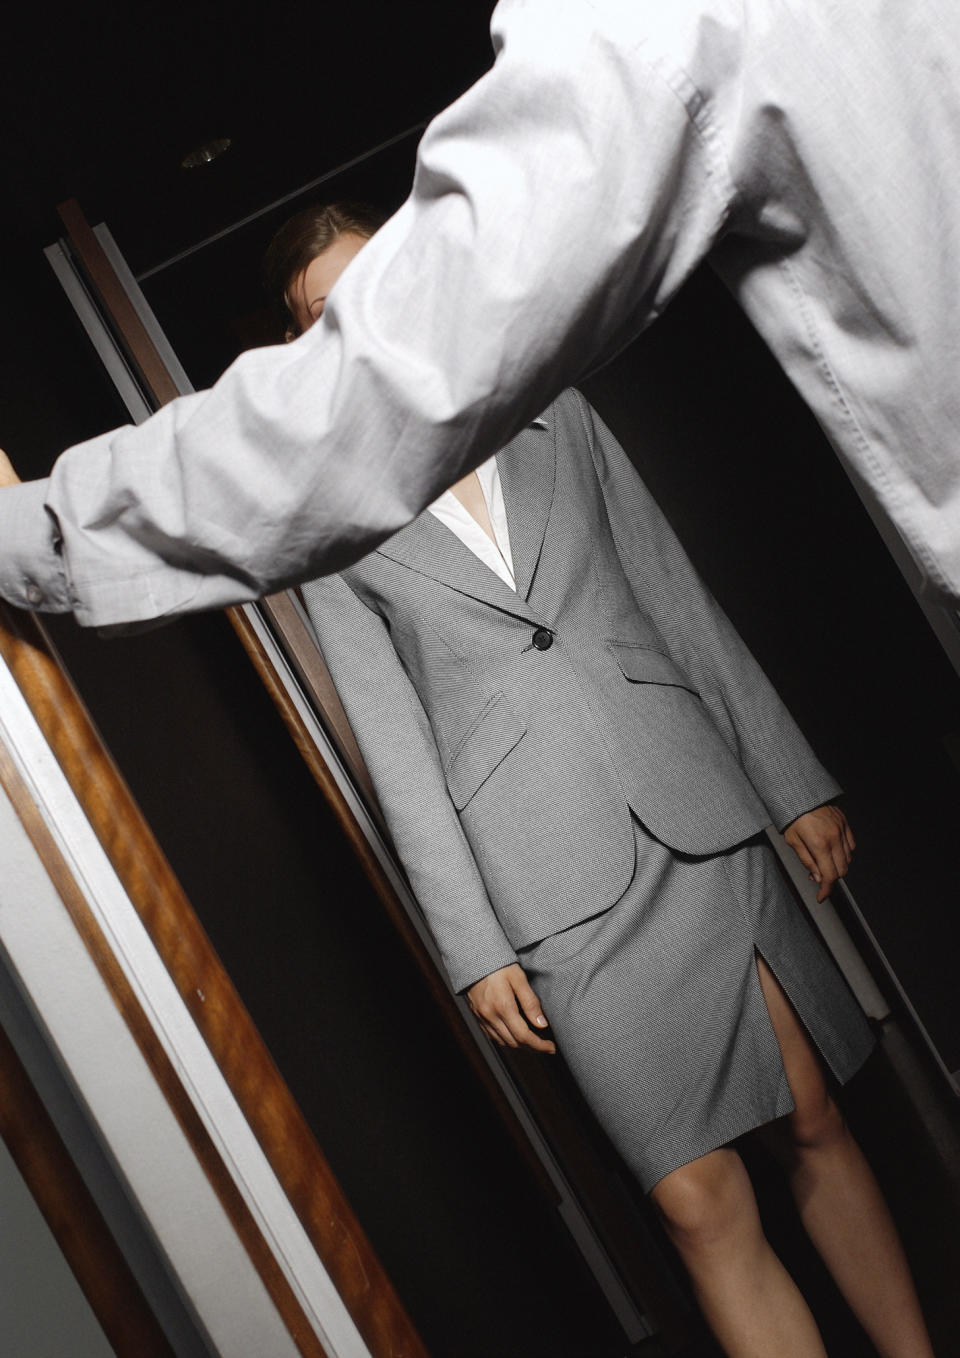 A person wearing a suit opens a door for a woman entering. The woman wears a fitted blazer and knee-length pencil skirt. Their faces are not visible